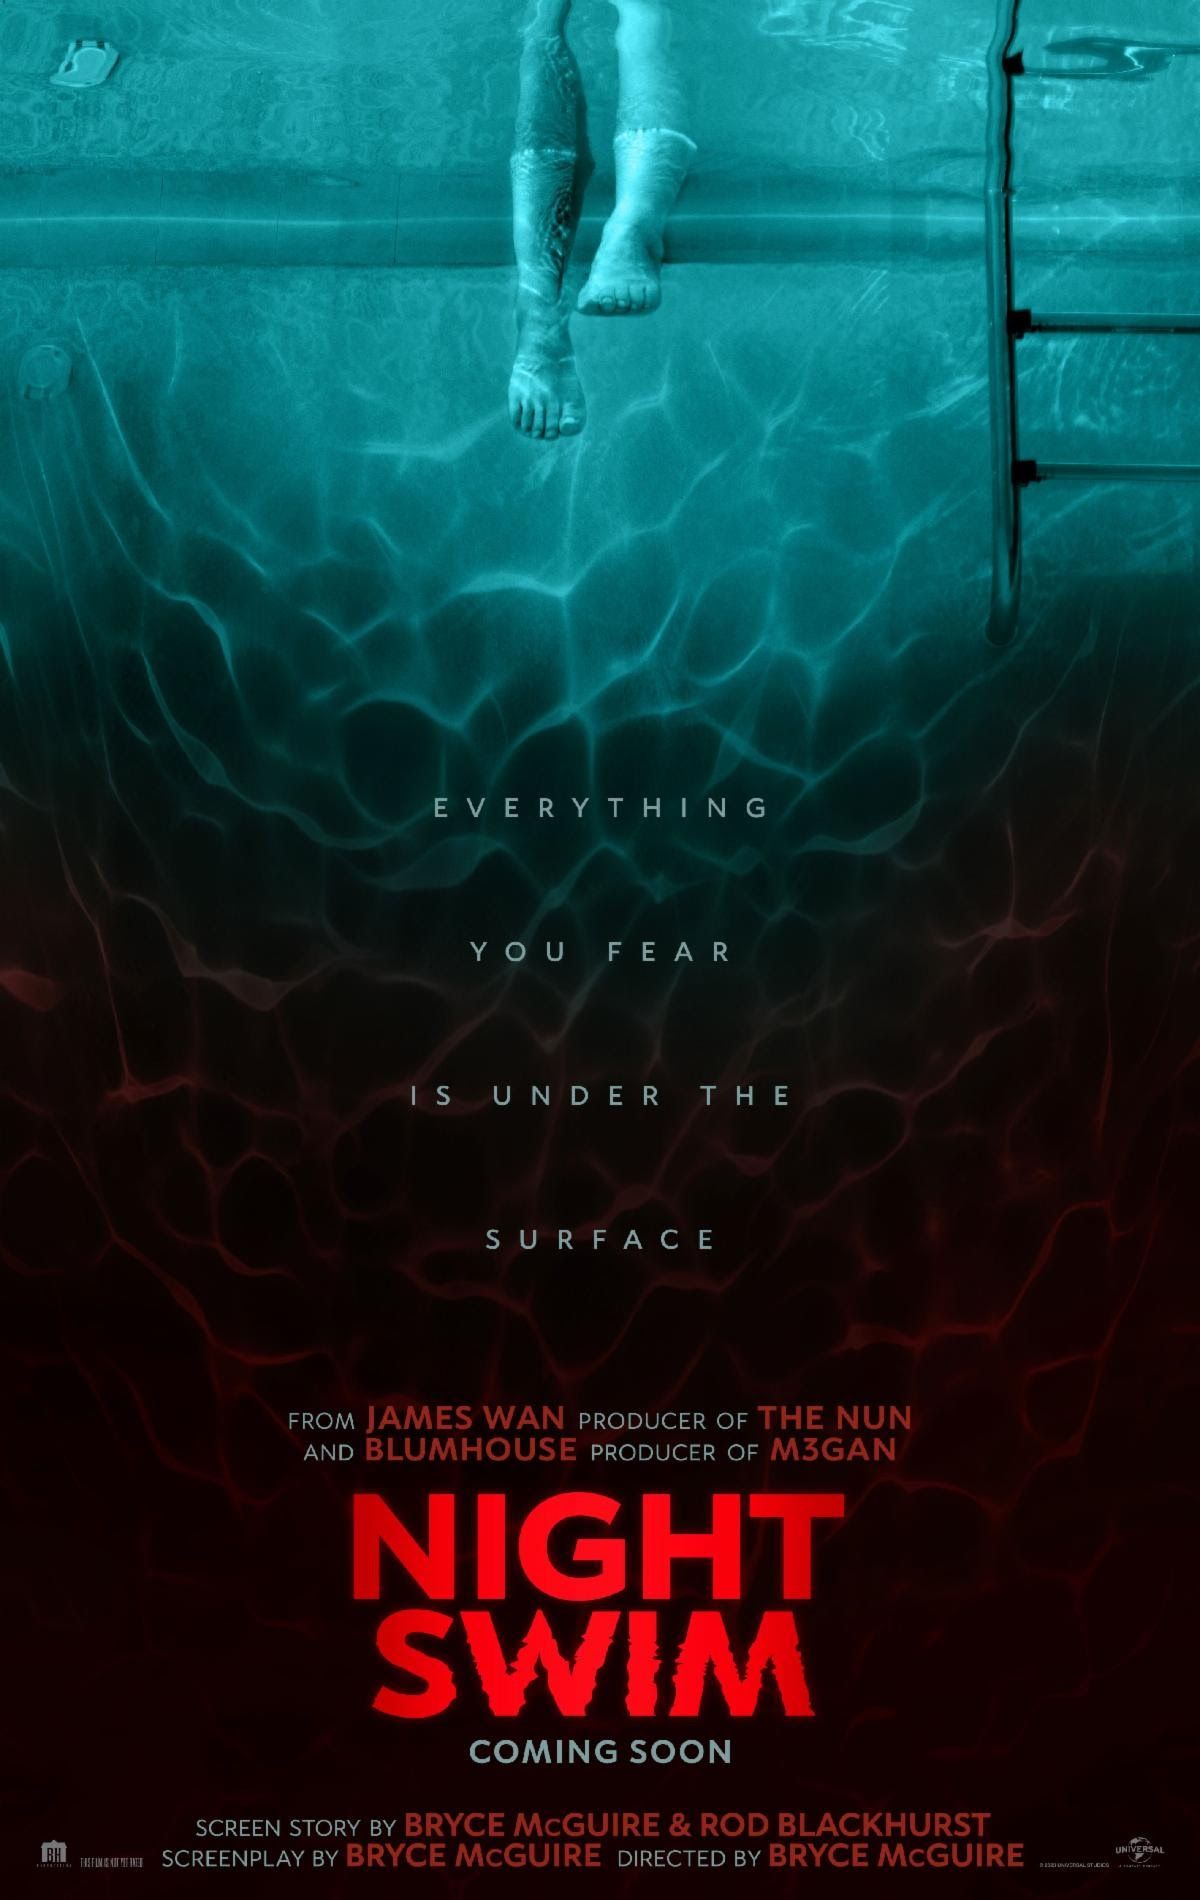 Night Swim Trailer Wyatt Russell Kerry Condon Face A Malevolent Force Hiding In Their